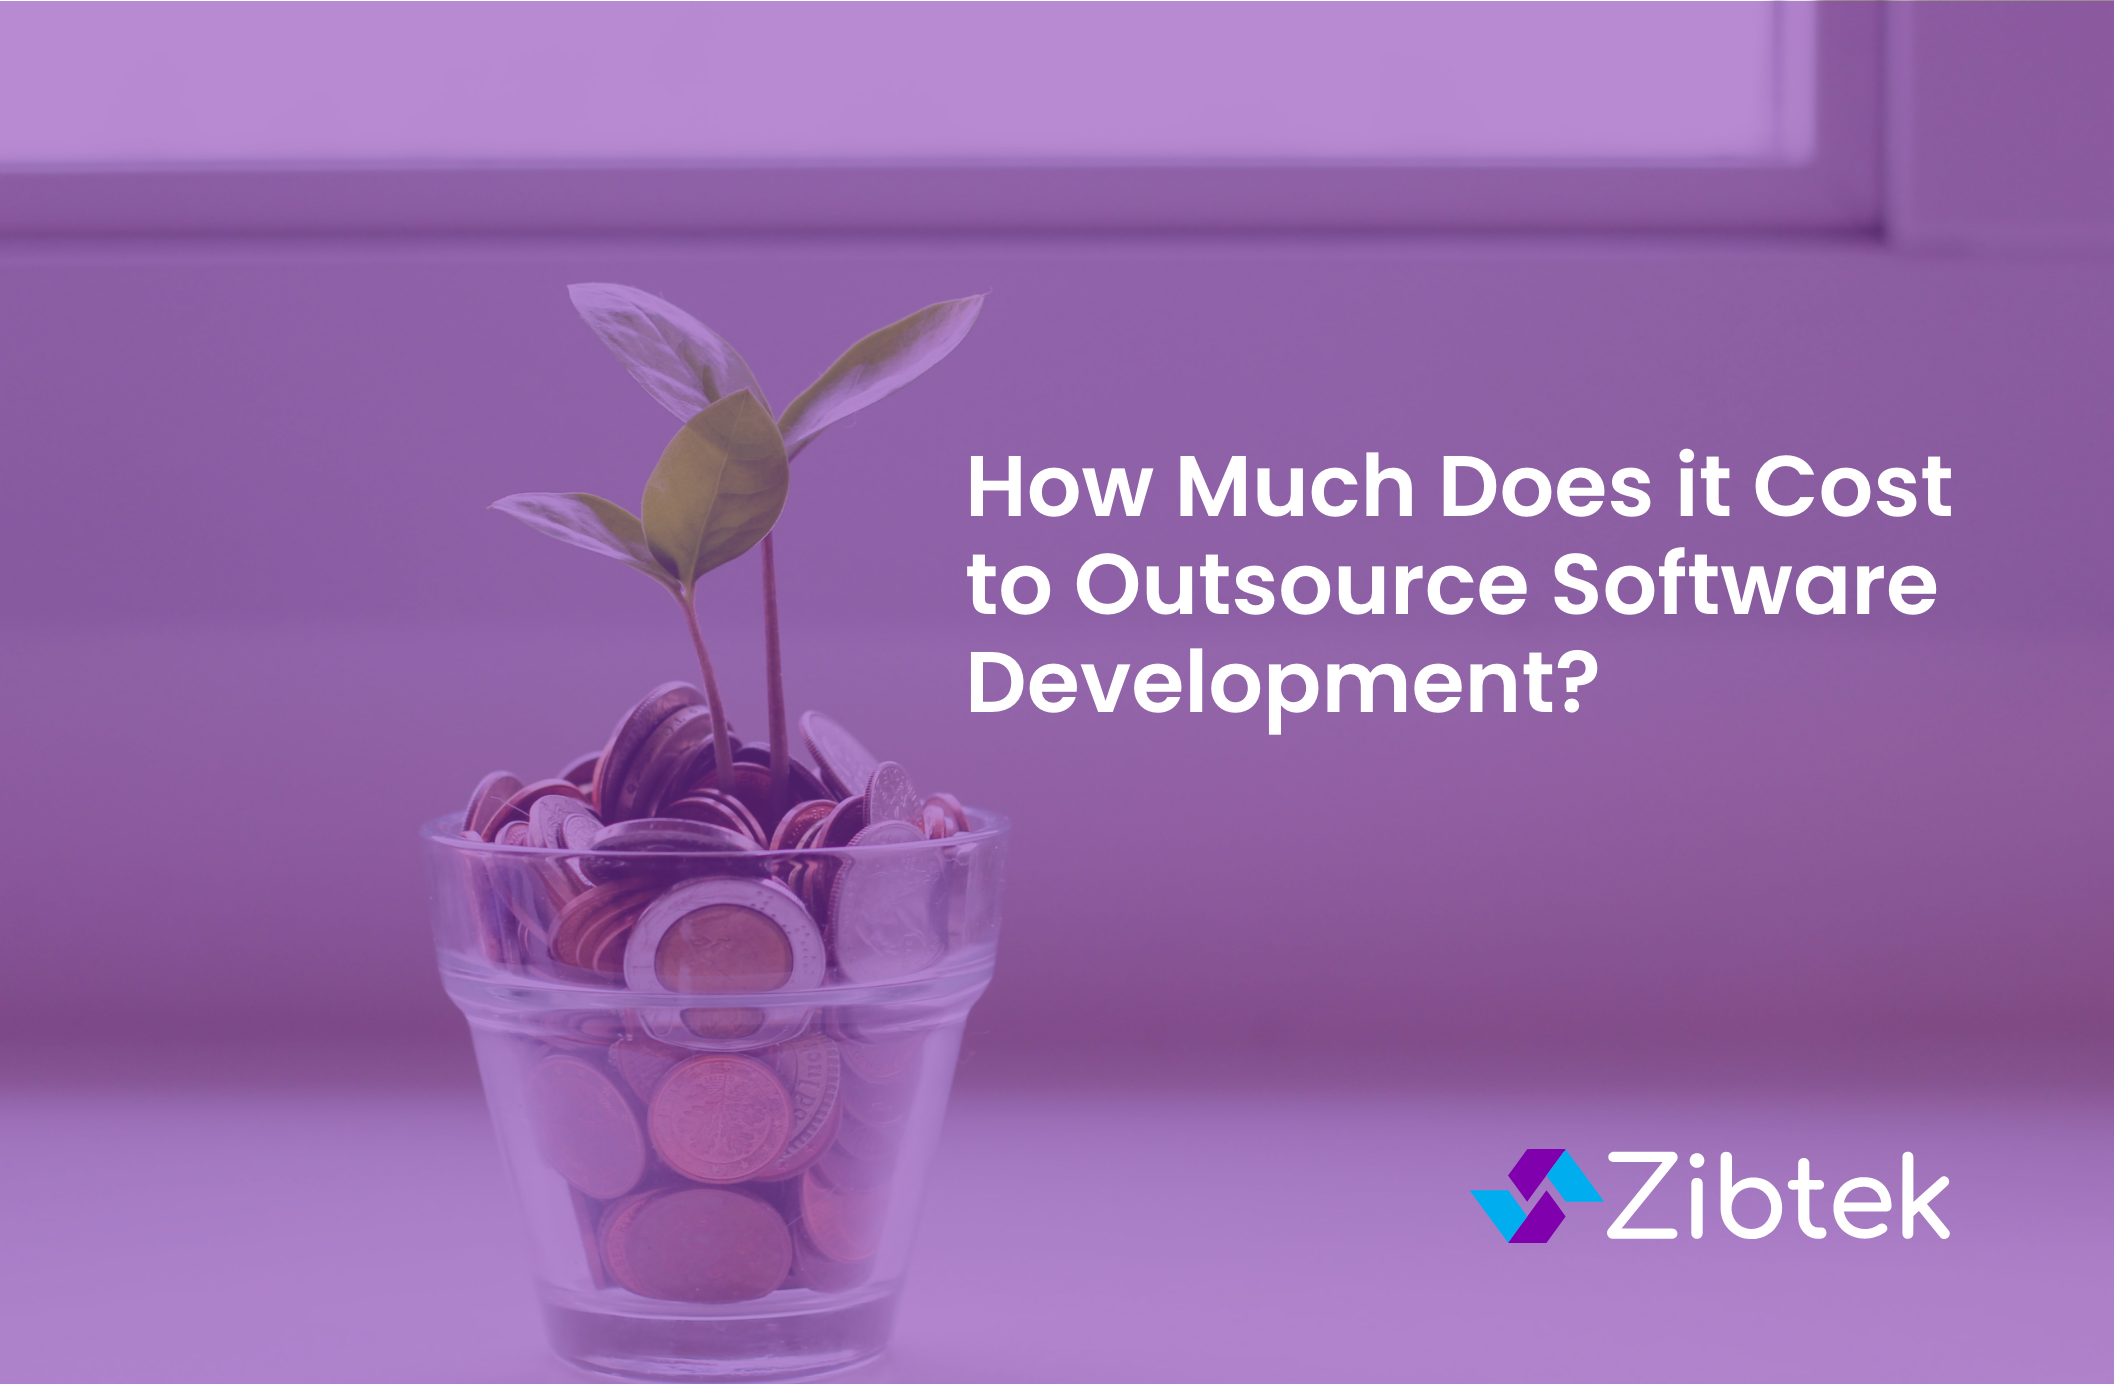 How Much Does it Cost to Outsource Software Development?